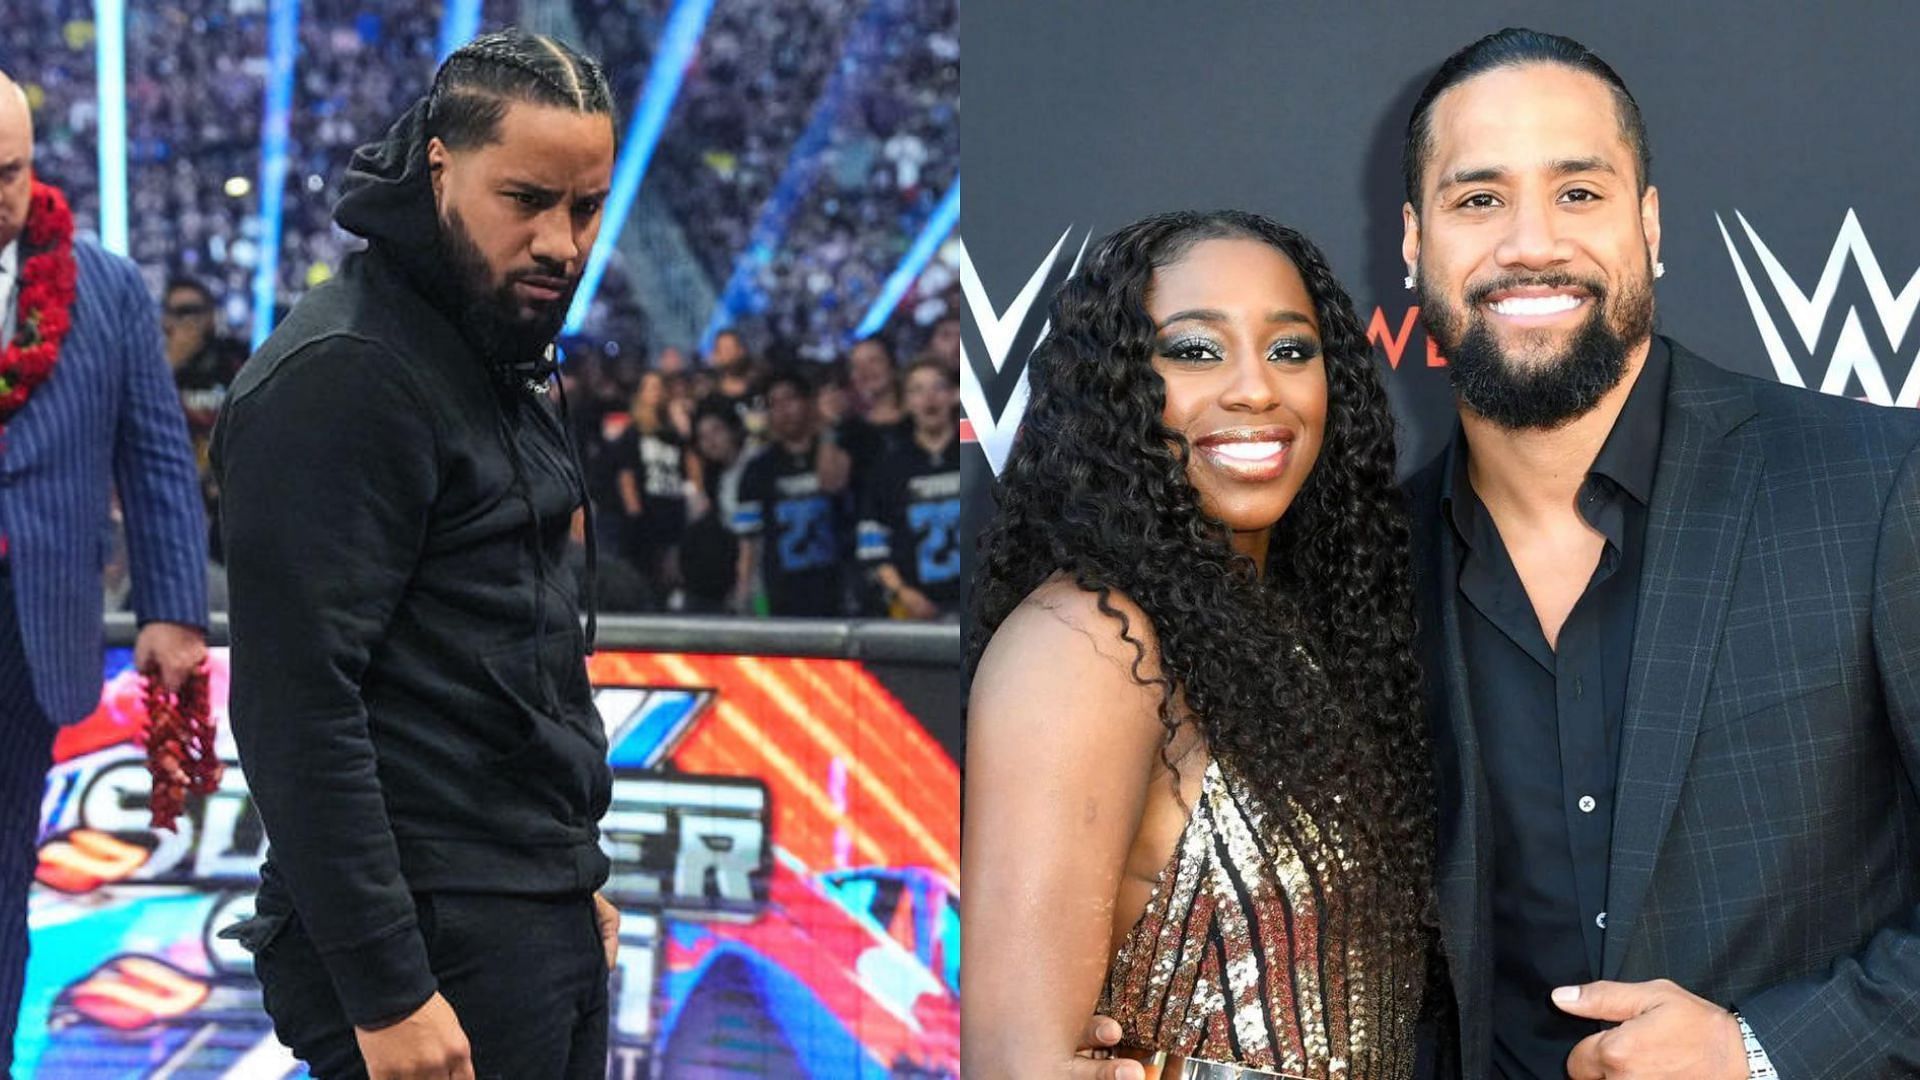 Jimmy Uso and Trinity (Naomi) are married